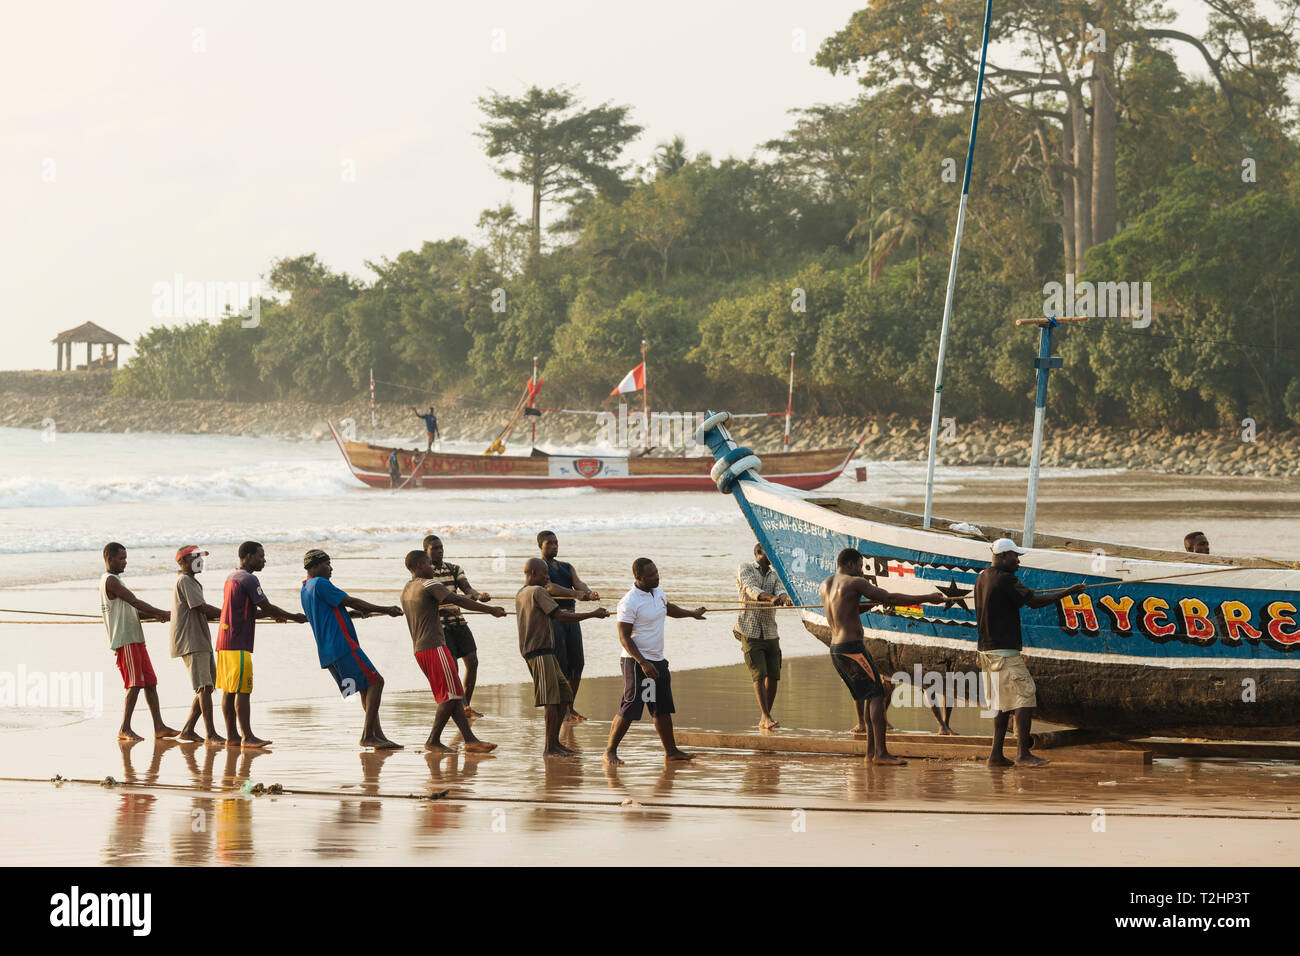 Men pulling boat out to sea, Busua, Ghana, Africa Stock Photo